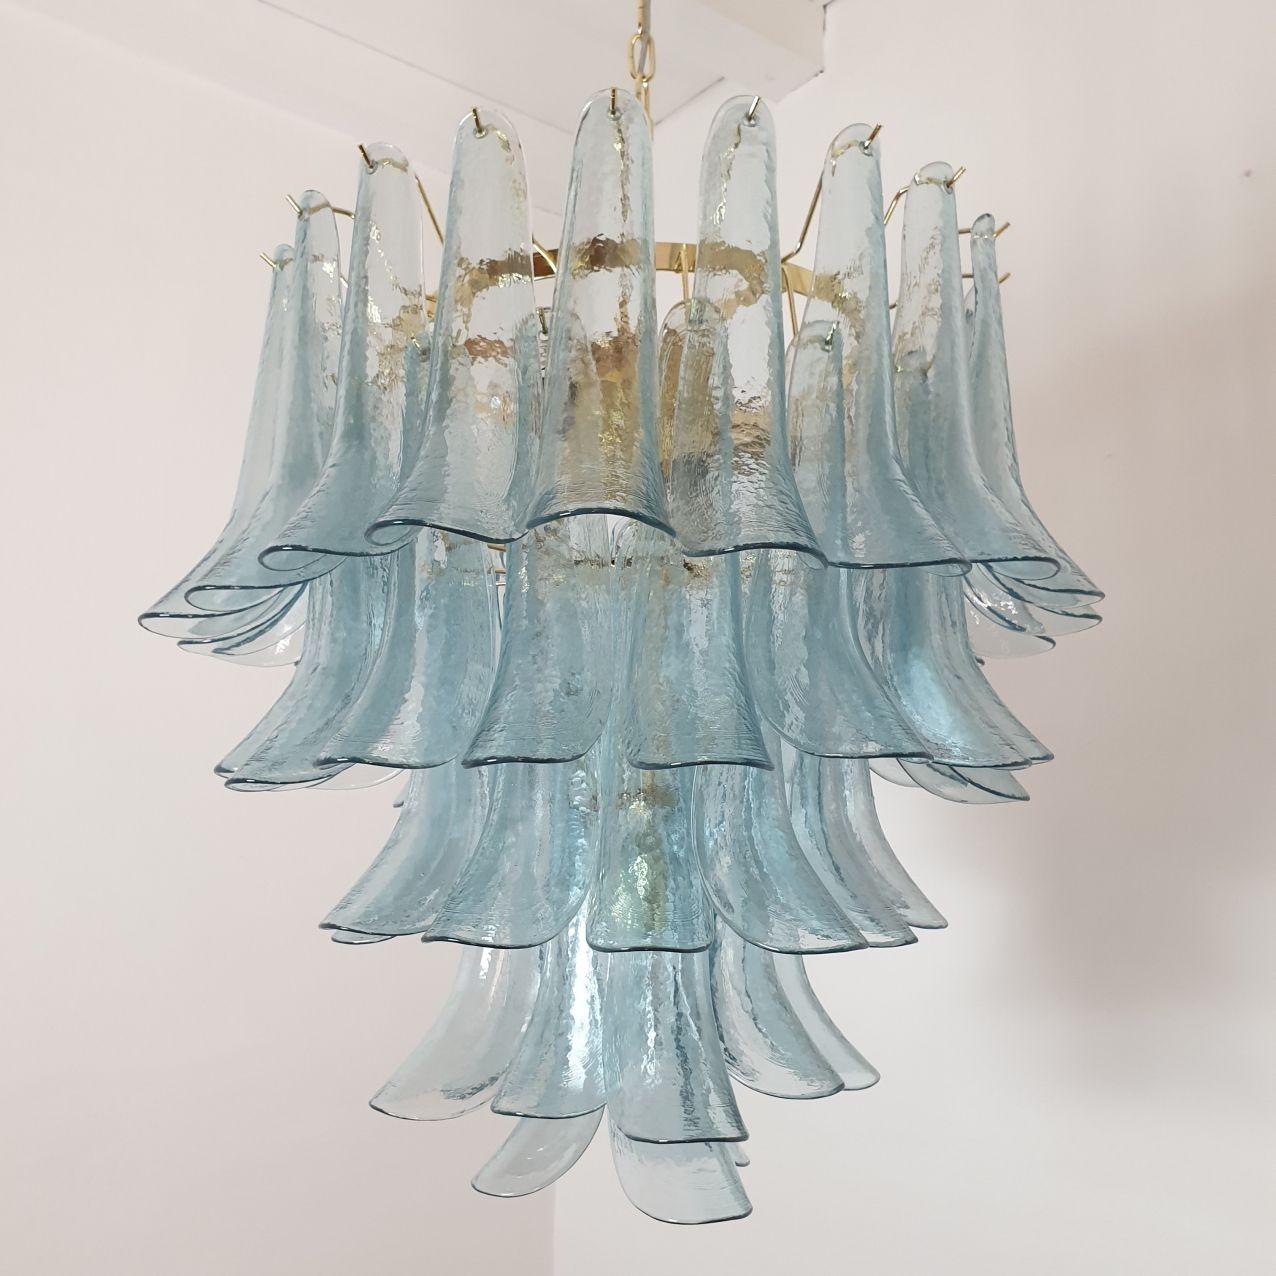 Mid century modern five-tier light blue Murano glass chandelier, by Mazzega, Italy, 1980s.
The light blue Murano glass chandelier is made of delicate handmade petal glasses, and a gold plated frame.
The chandelier has 7 lights, and is newly rewired